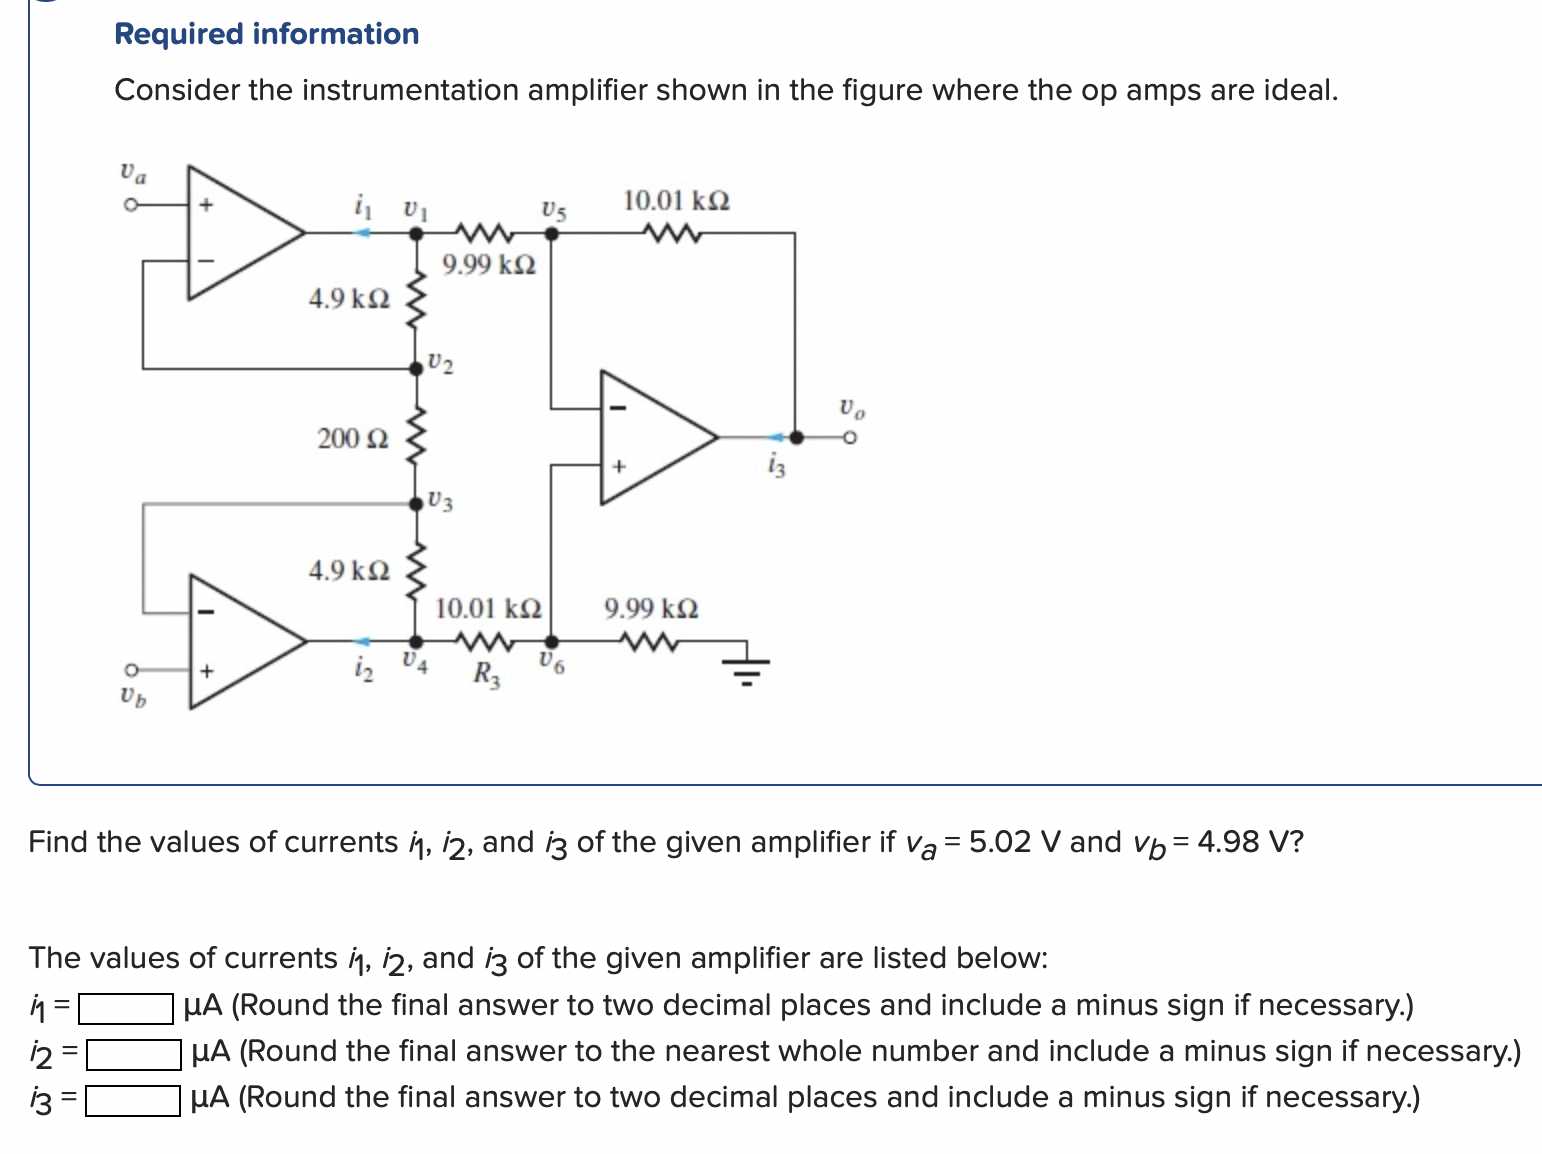 Required information Consider the instrumentation amplifier shown in the figure where the op amps are ideal. Find the values of currents i1, i2, and i3 of the given amplifier if va = 5.02 V and vb = 4.98 V? The values of currents i1, i2, and i3 of the given amplifier are listed below: i1 = μA (Round the final answer to two decimal places and include a minus sign if necessary.) i2 = μA (Round the final answer to the nearest whole number and include a minus sign if necessary.) i3 = μA (Round the final answer to two decimal places and include a minus sign if necessary.) 